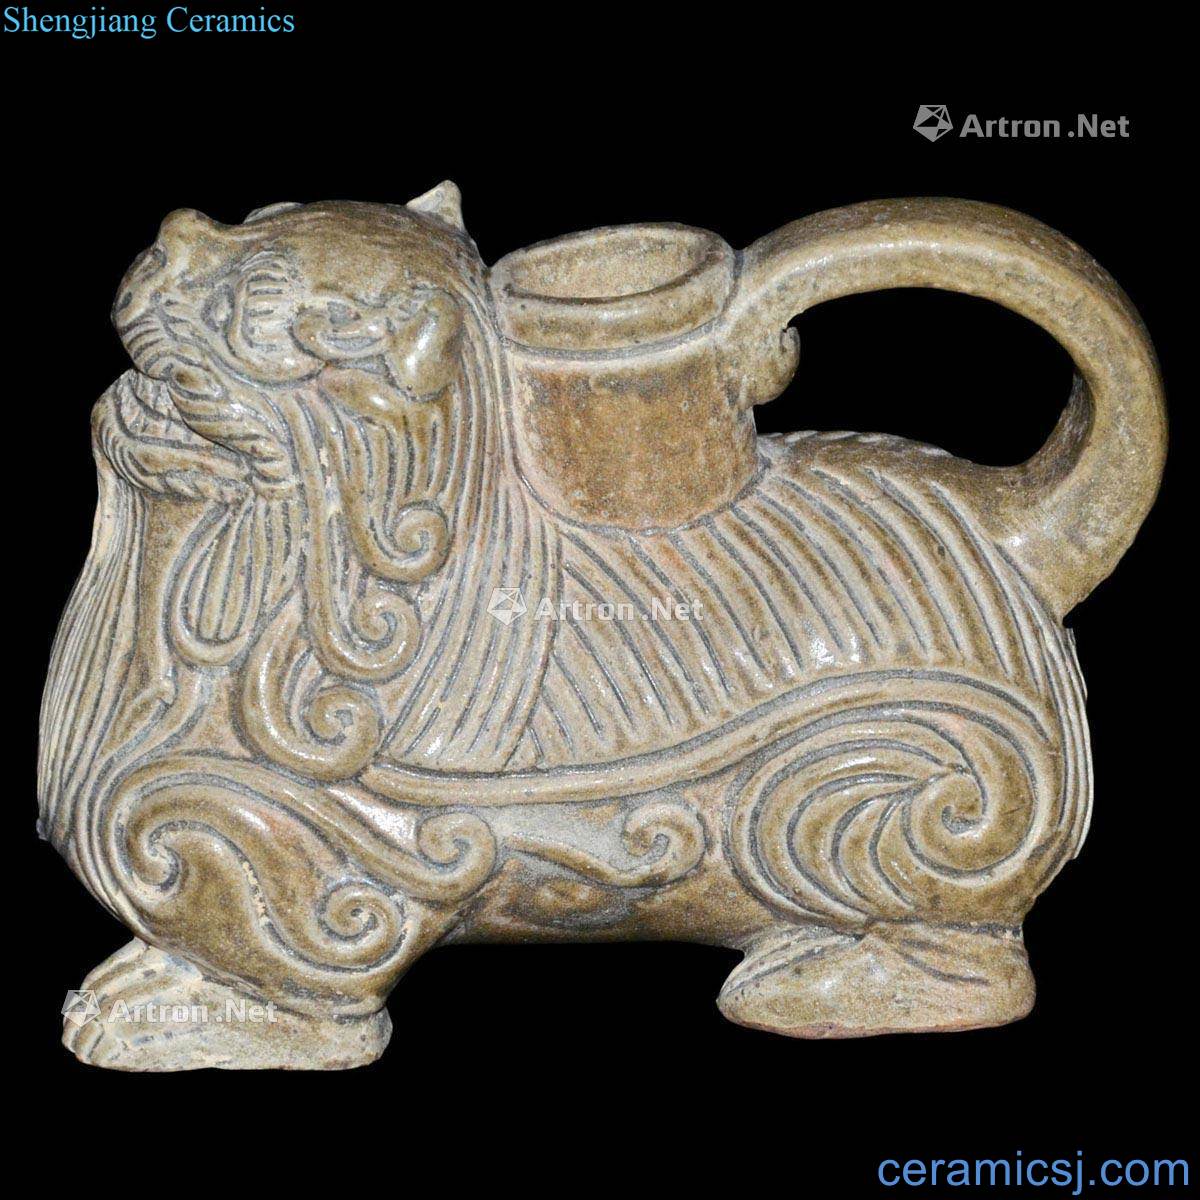 The kiln green glaze of the eastern lion put the pot